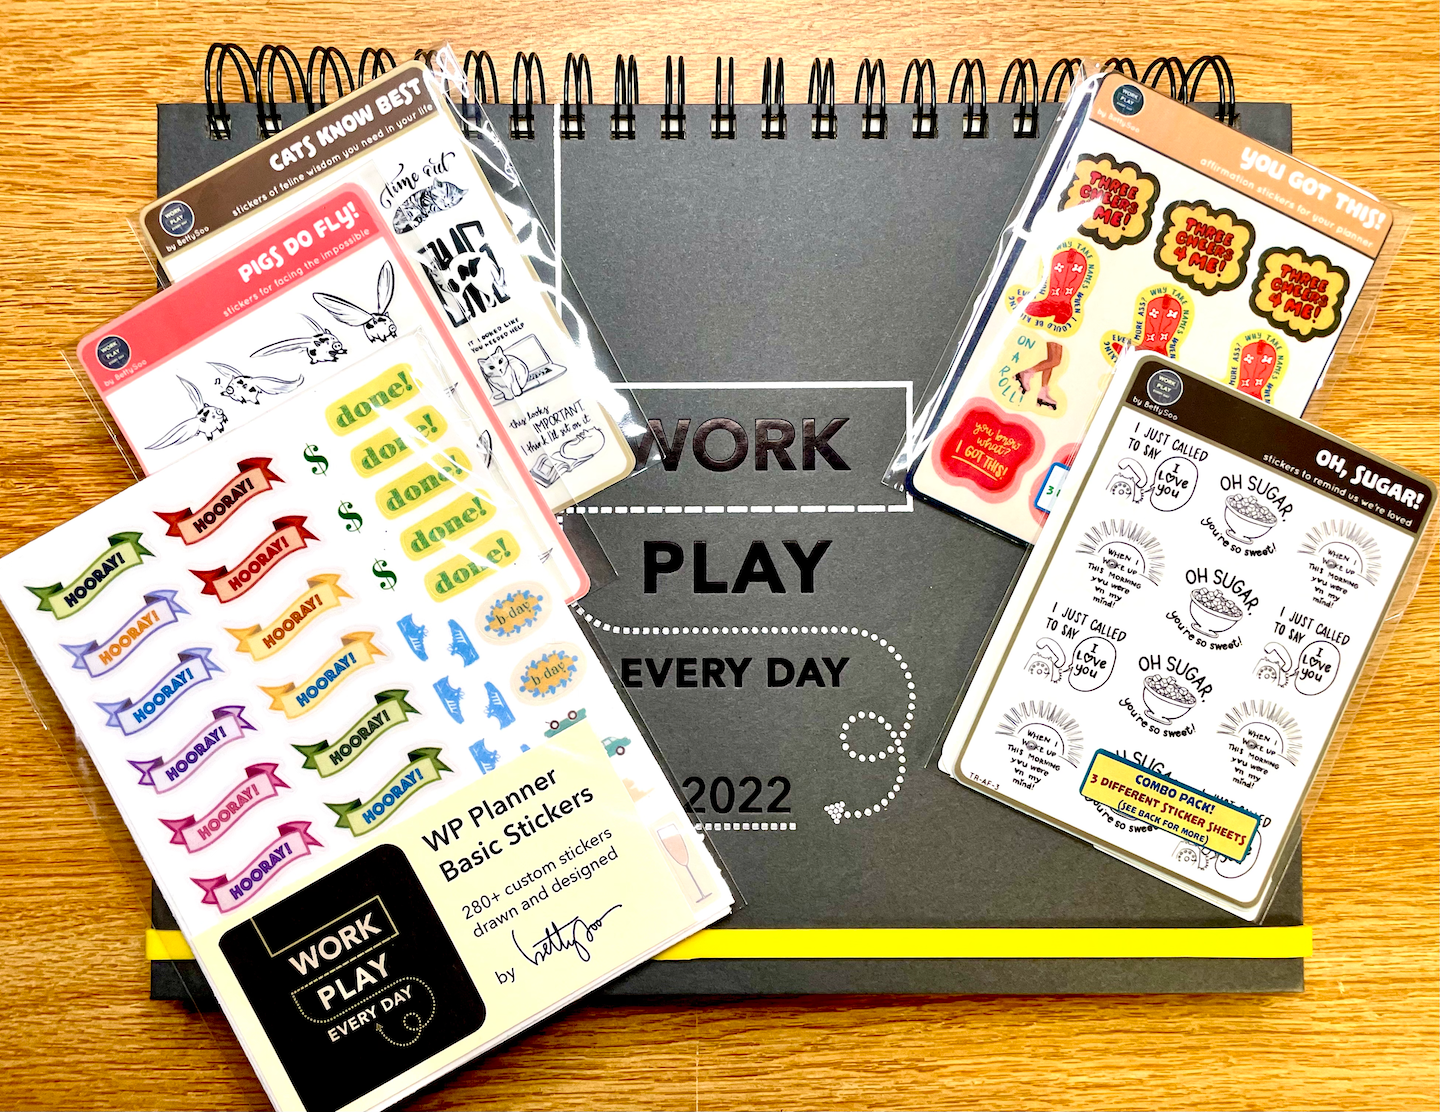 Ultimate Productivity Stickers Set - Large Value Pack of 20 Planner Sticker Sheets - Calendars, to Do Lists, Habit Trackers, Goals - Accessories 